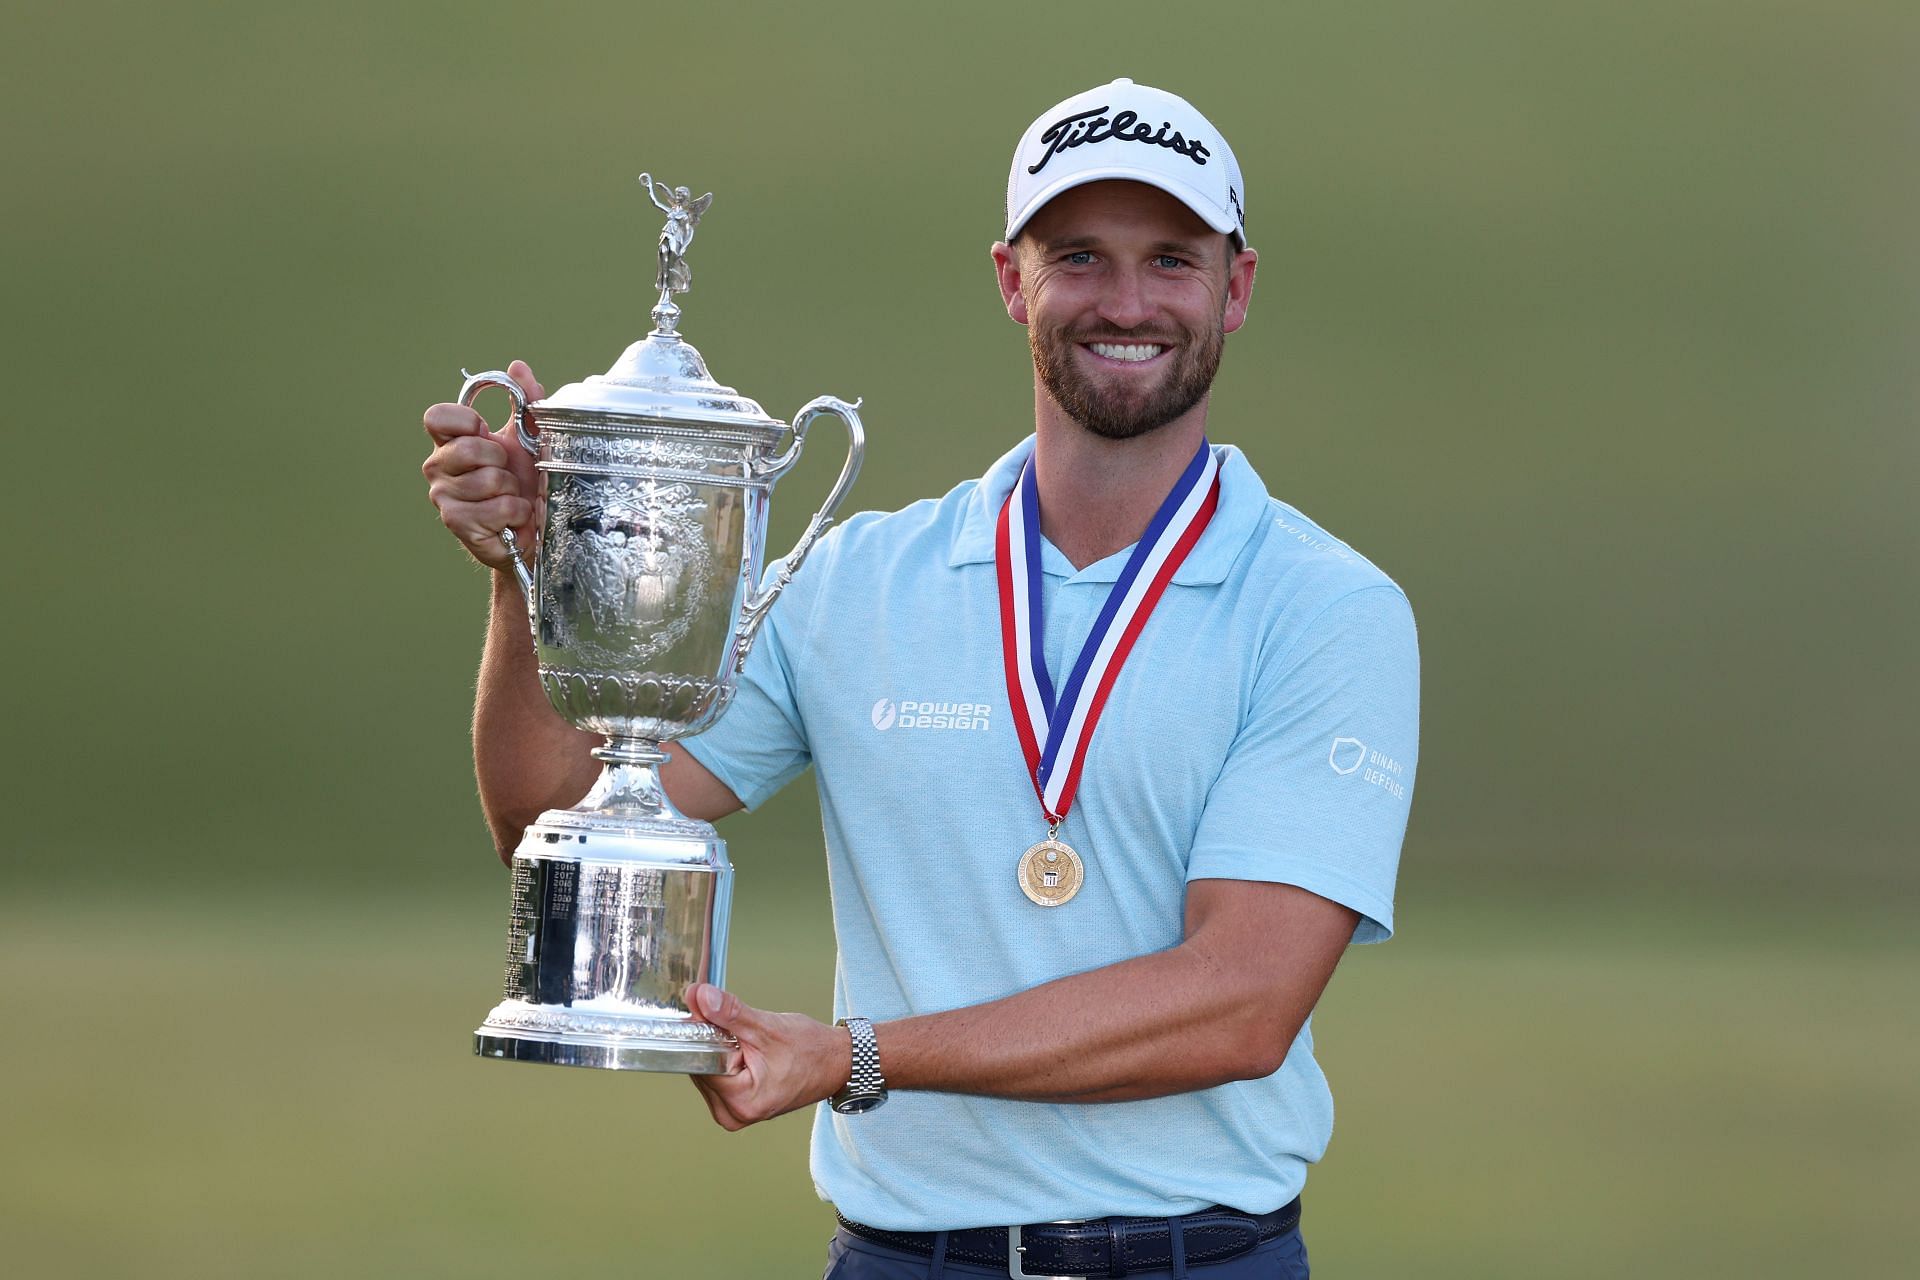 Wyndham Clark poses with the trophy and medal after winning the 123rd US Open Championship